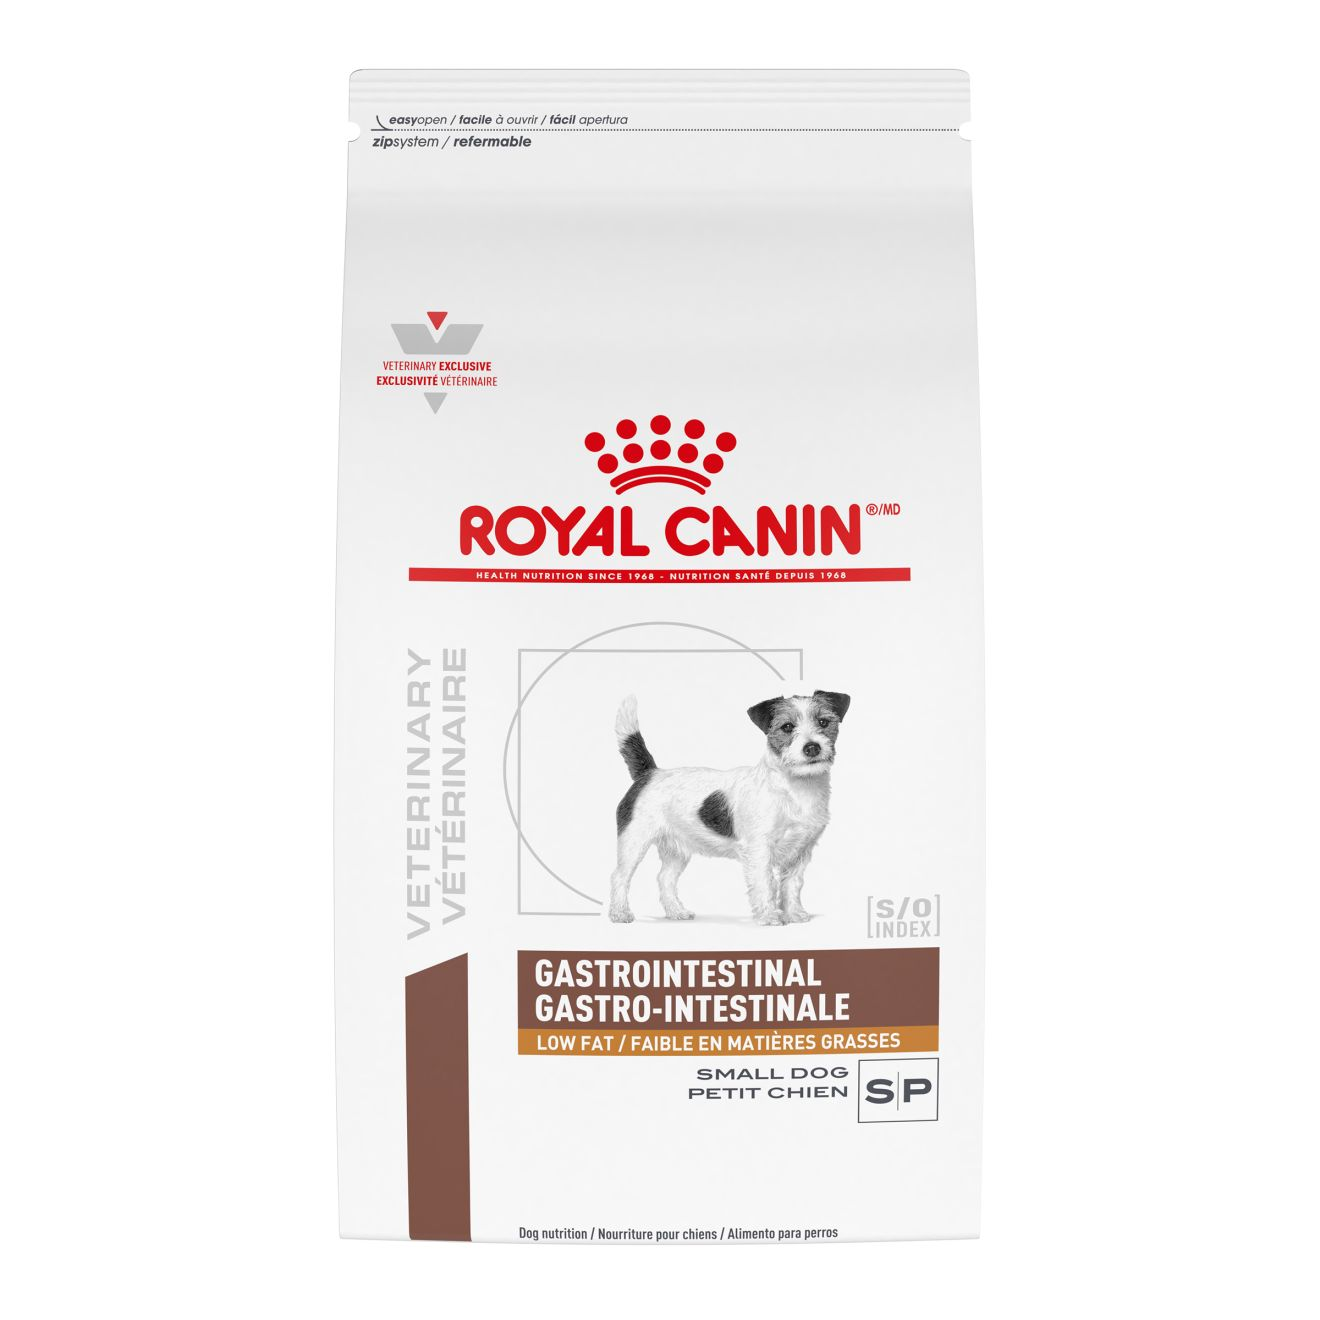 Canine Gastrointestinal Low Fat Small Dog